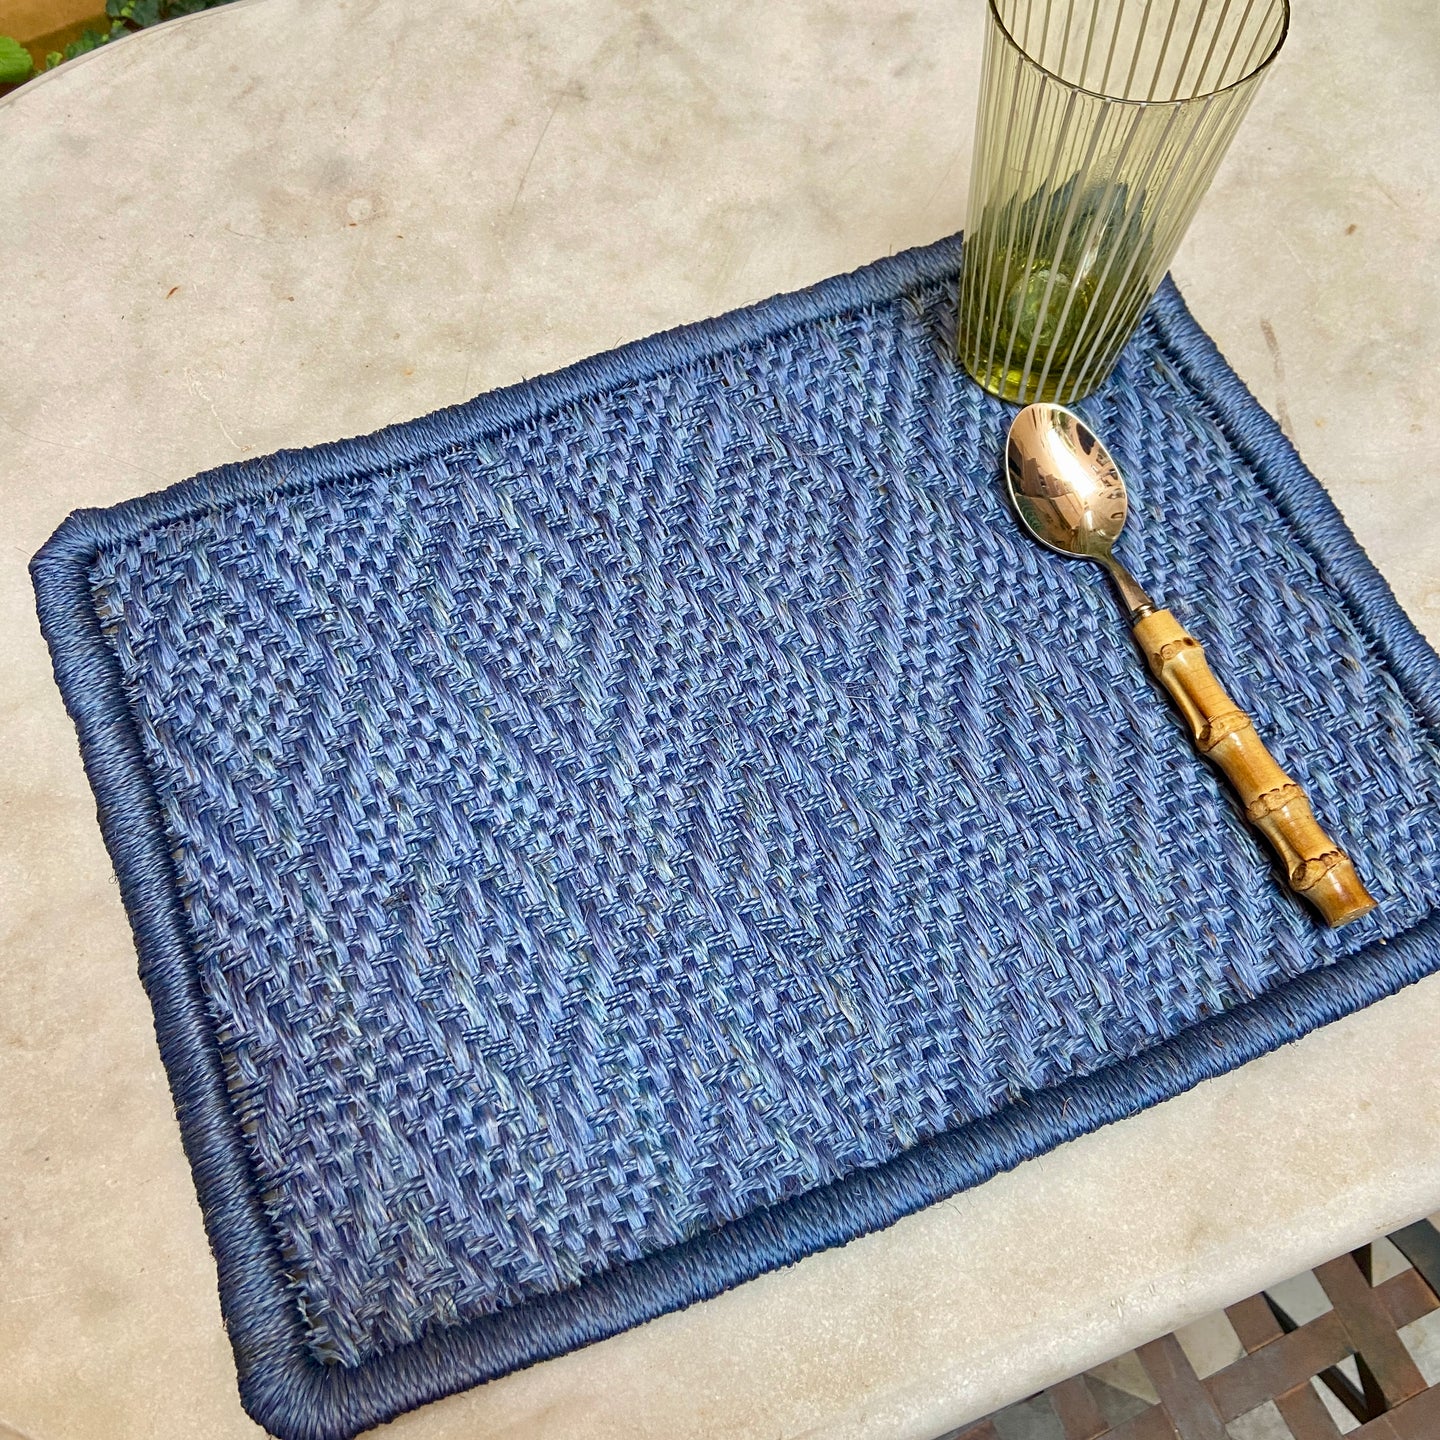 San Gil - Placemats Set of Two - Light Blue